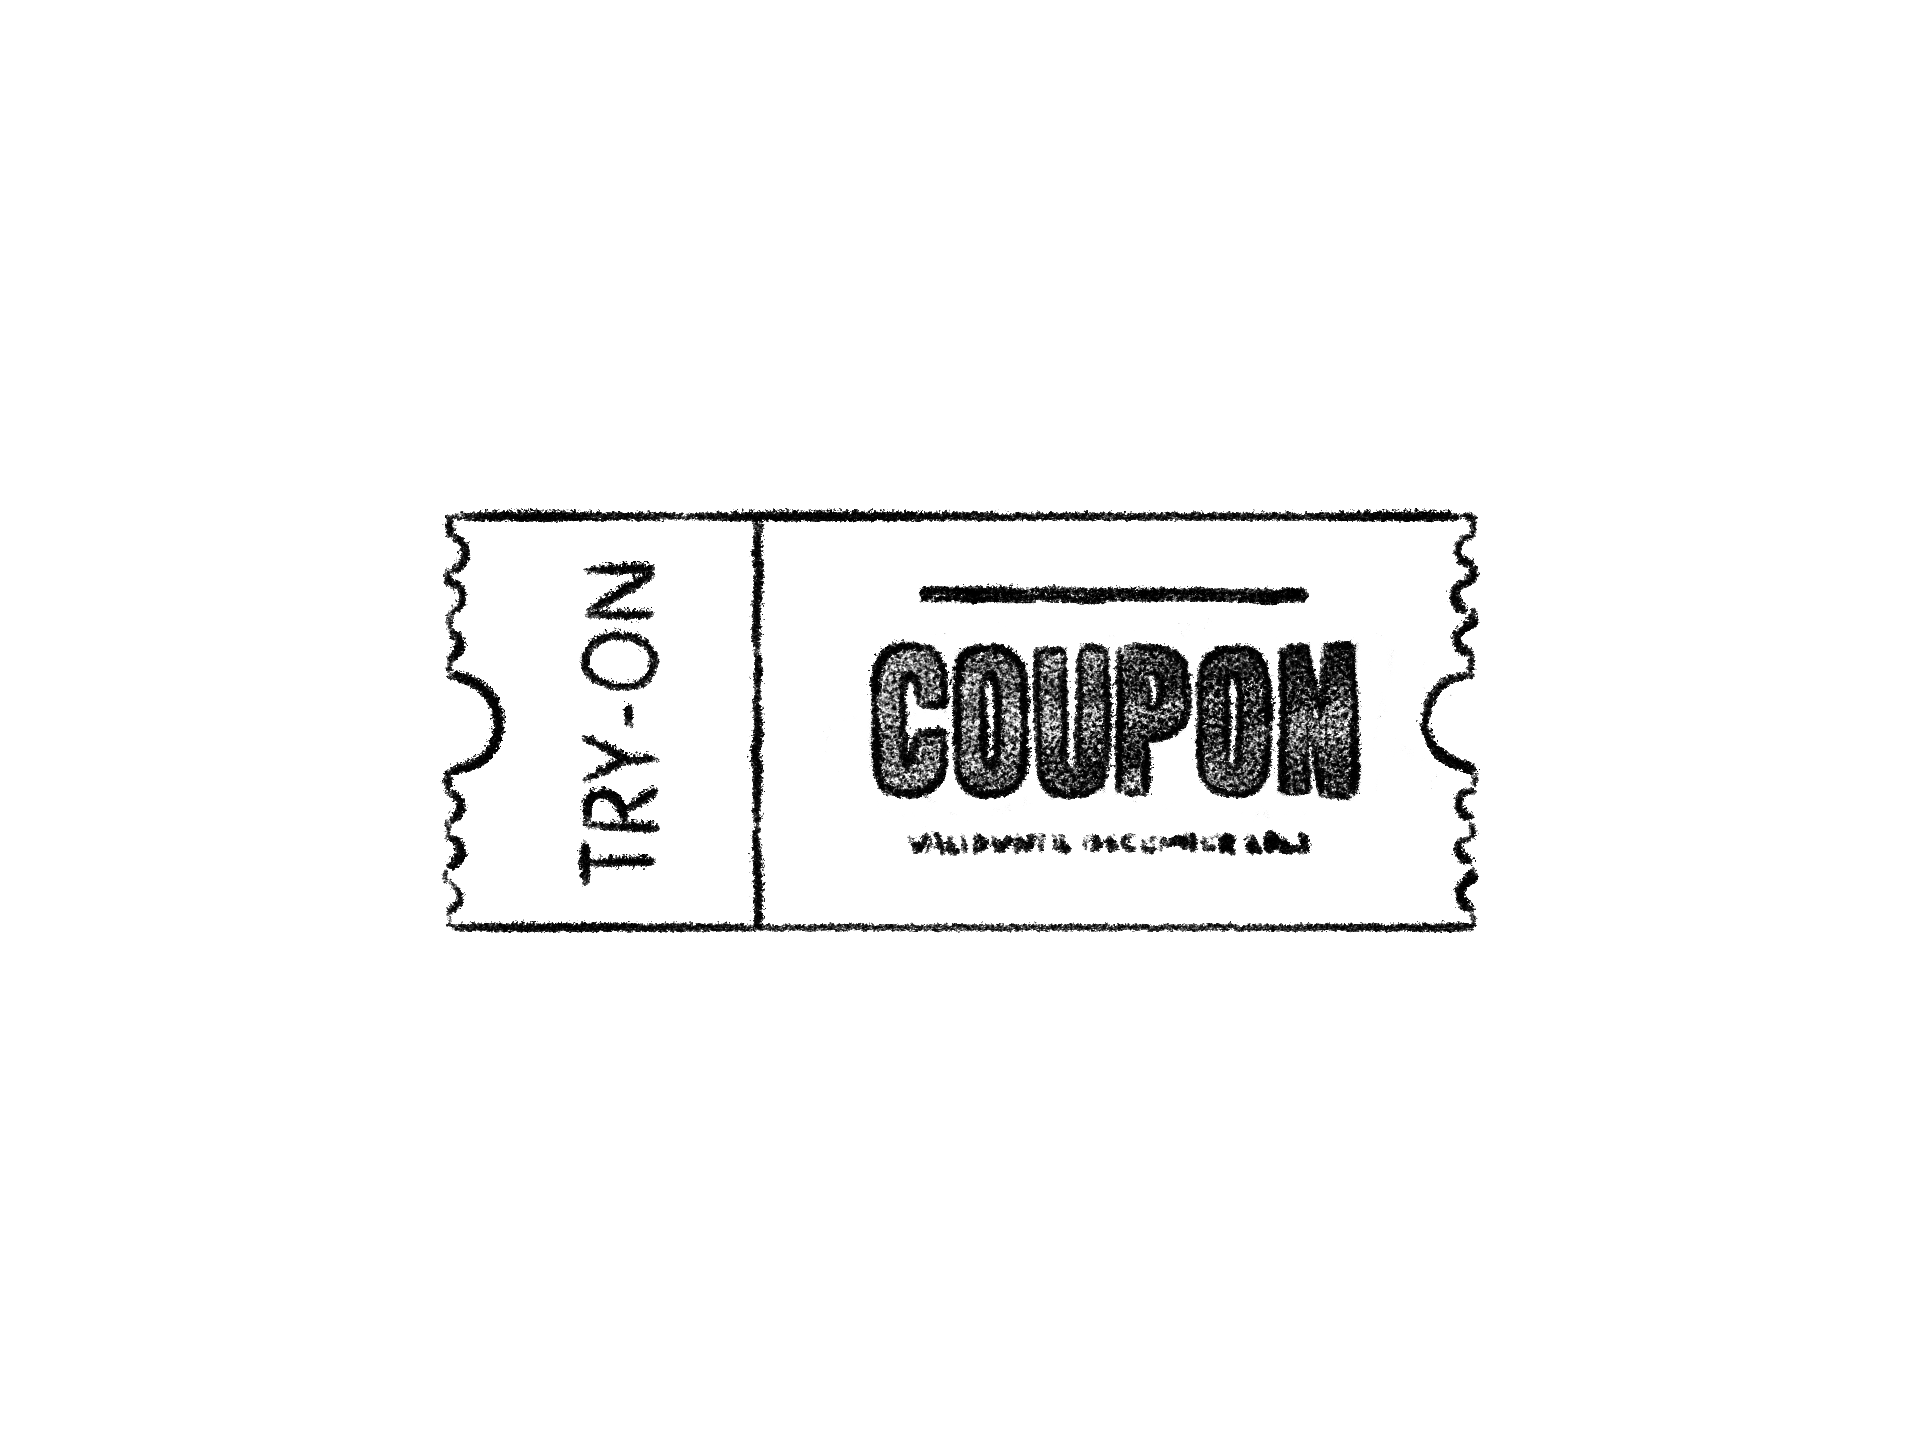 Cover of Try-On Coupon, a short story